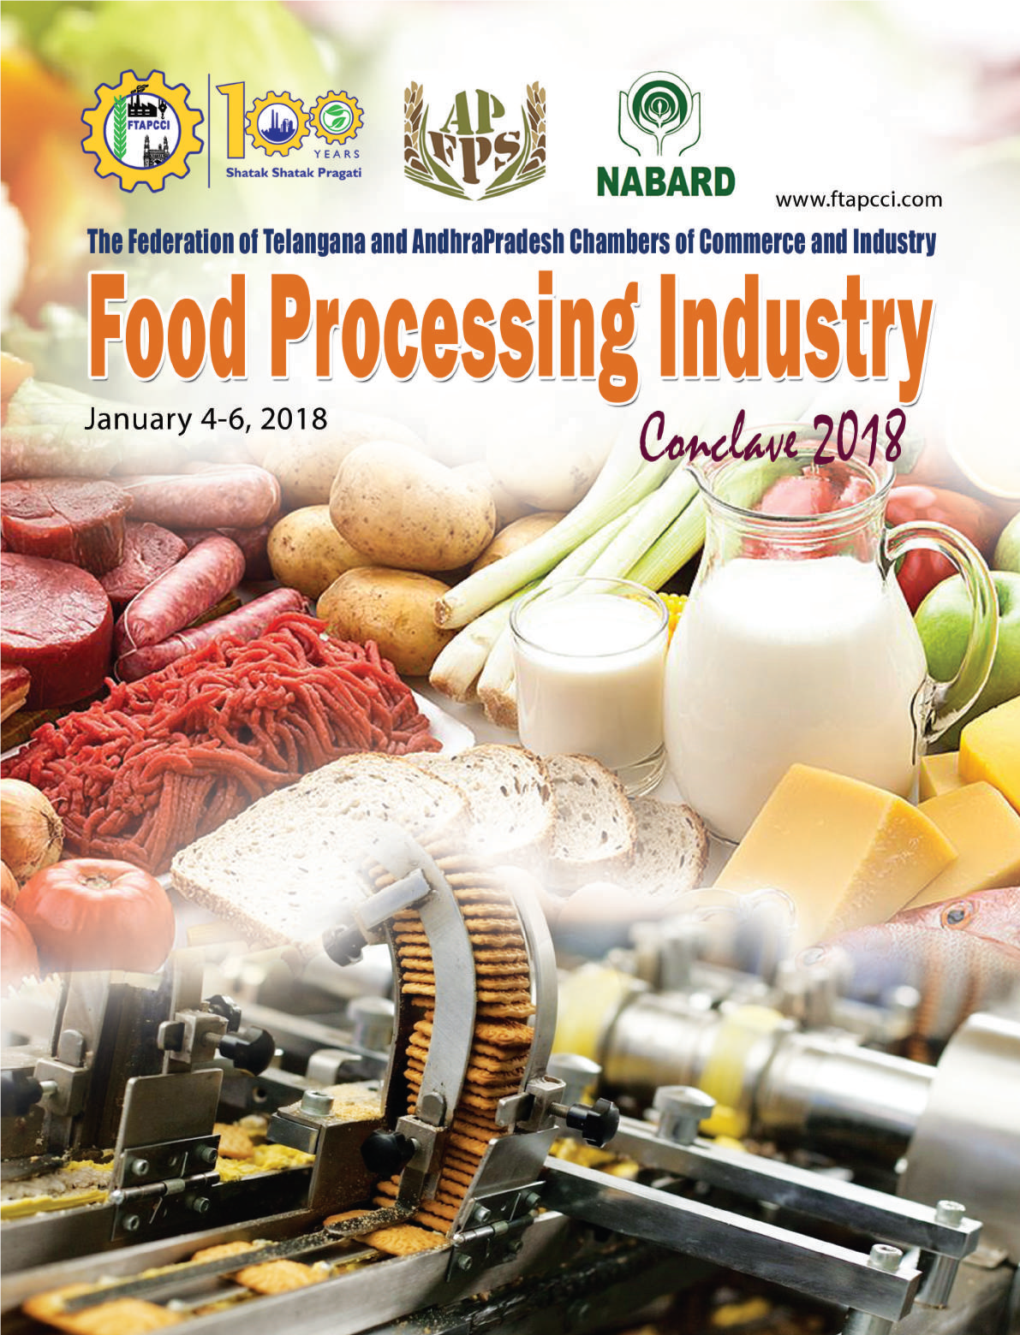 Food Processing Conclave 1 2 Food Processing Conclave | January 2018 FTAPCCI Food Processing Industry Conclave 2018 CONTENTS January 4Th , 5Th & 6Th - 2018